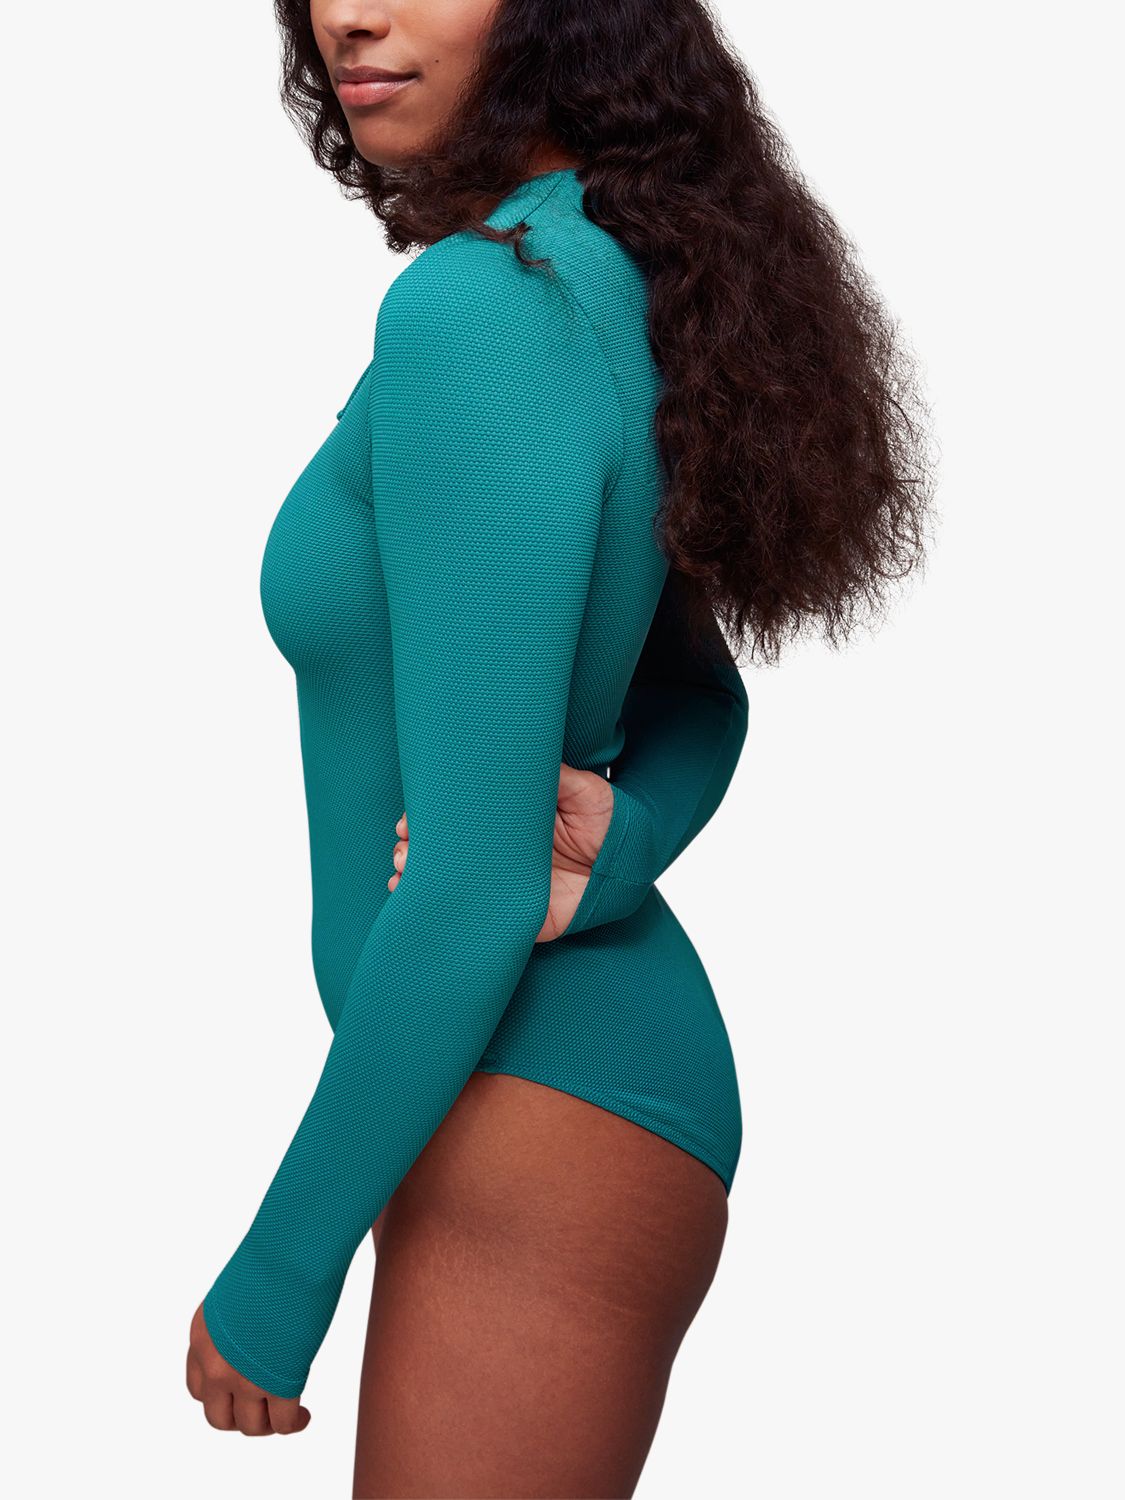 Whistles Long Sleeve Textured Swimsuit, Teal, 6